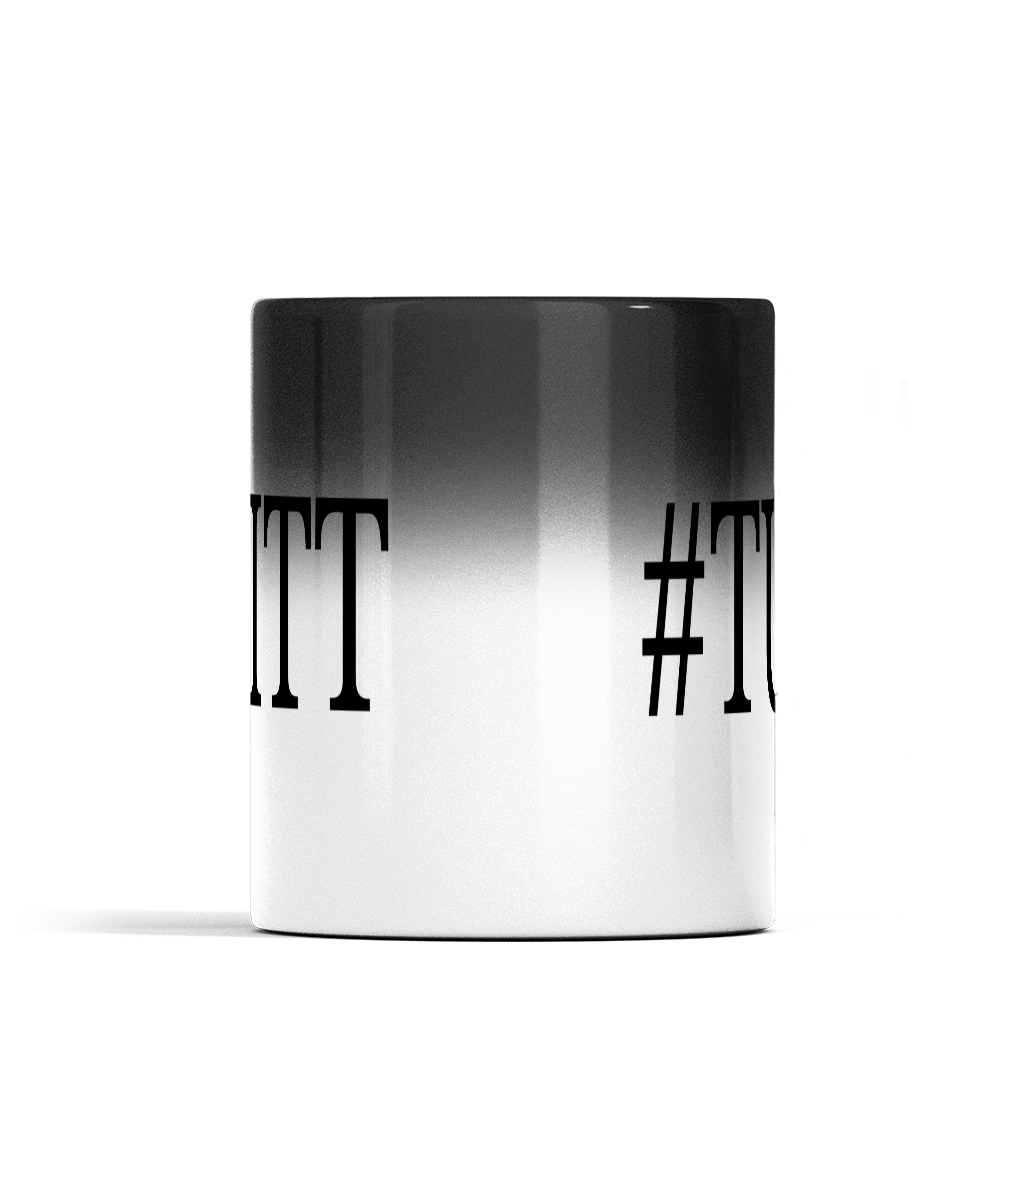 11oz TUITT Colour Changing Mug For Tea, Coffee Or Warm Drinks Black Colour When Cold #TUITT Appears And Turns To White Ceramic Tea Cup When Warm